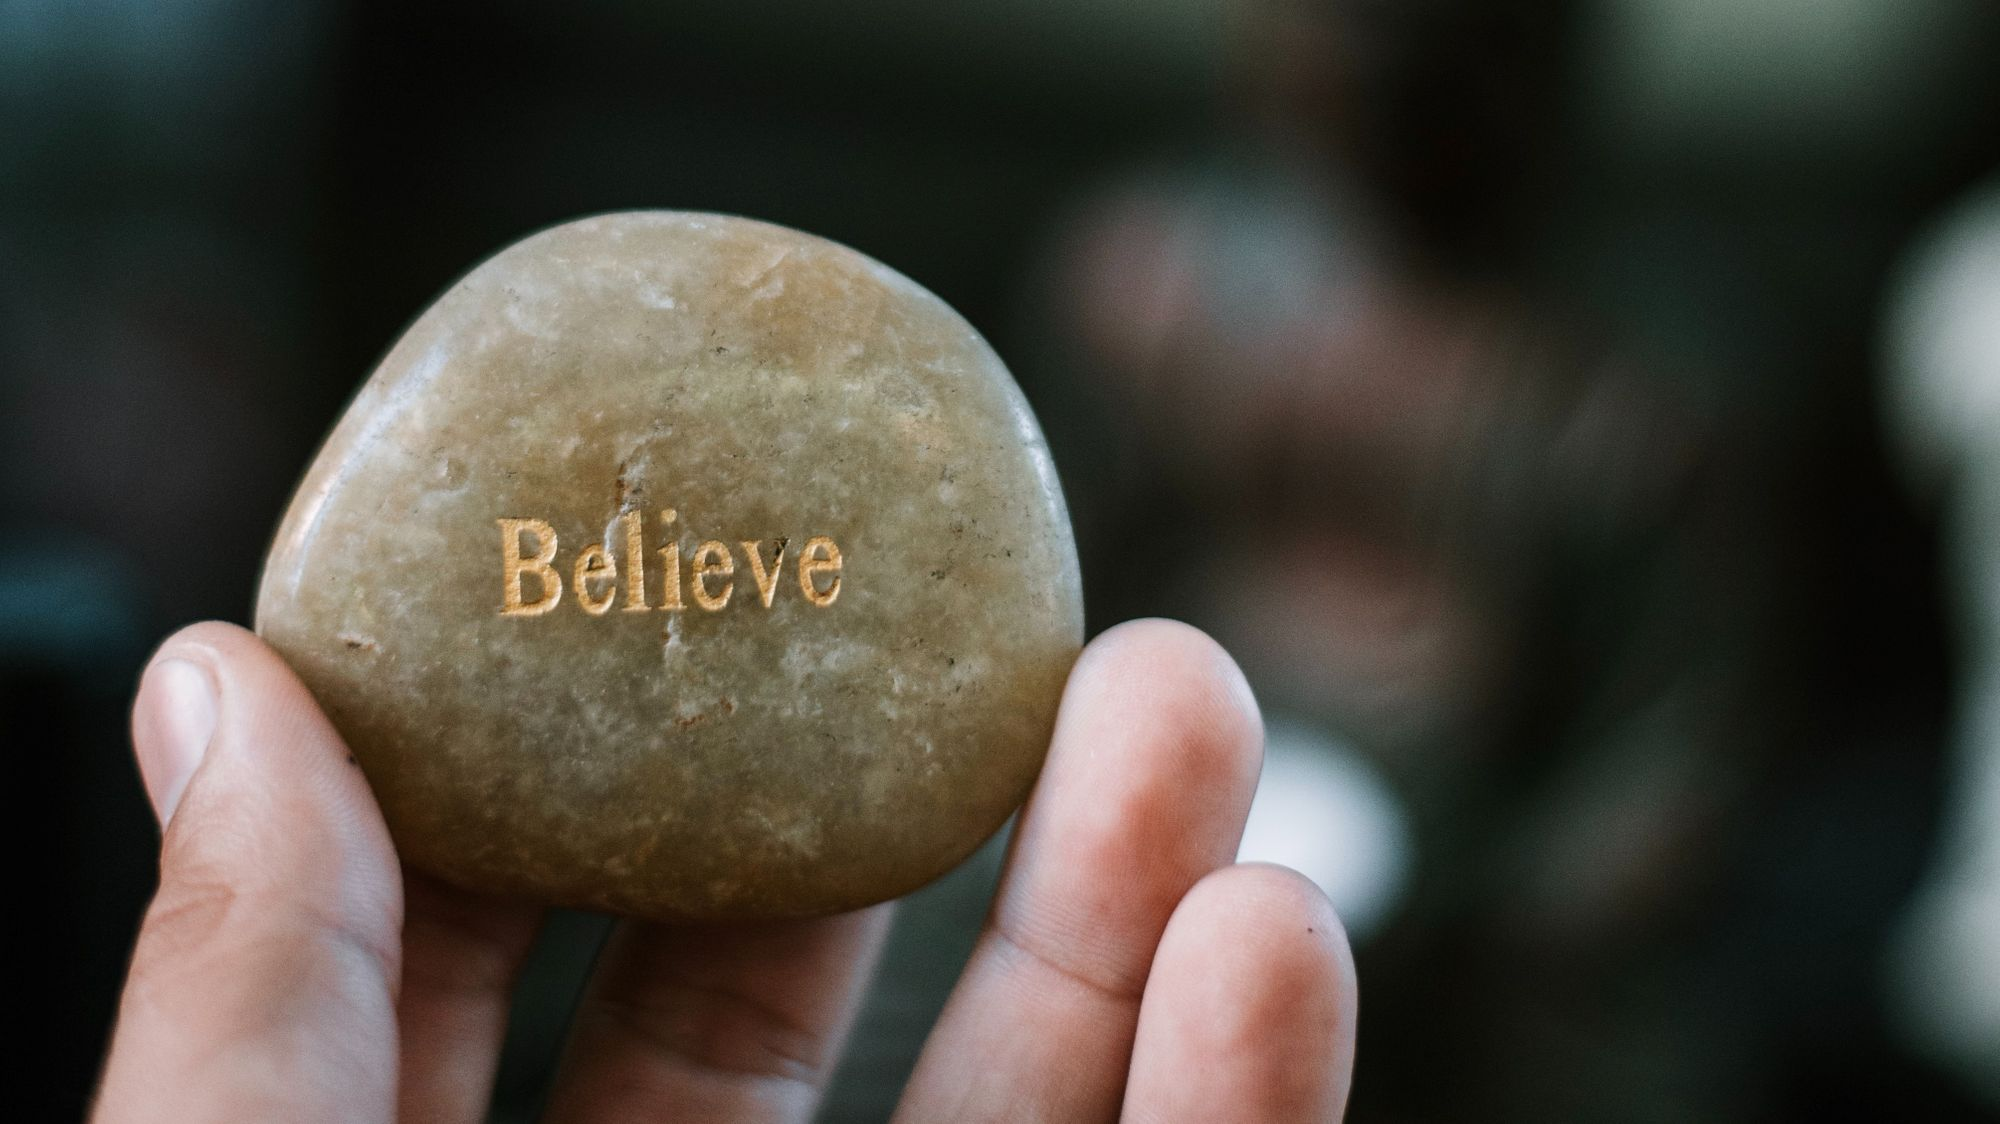 person holding brown stone with believe print photo  Free Human Image on Unsplash